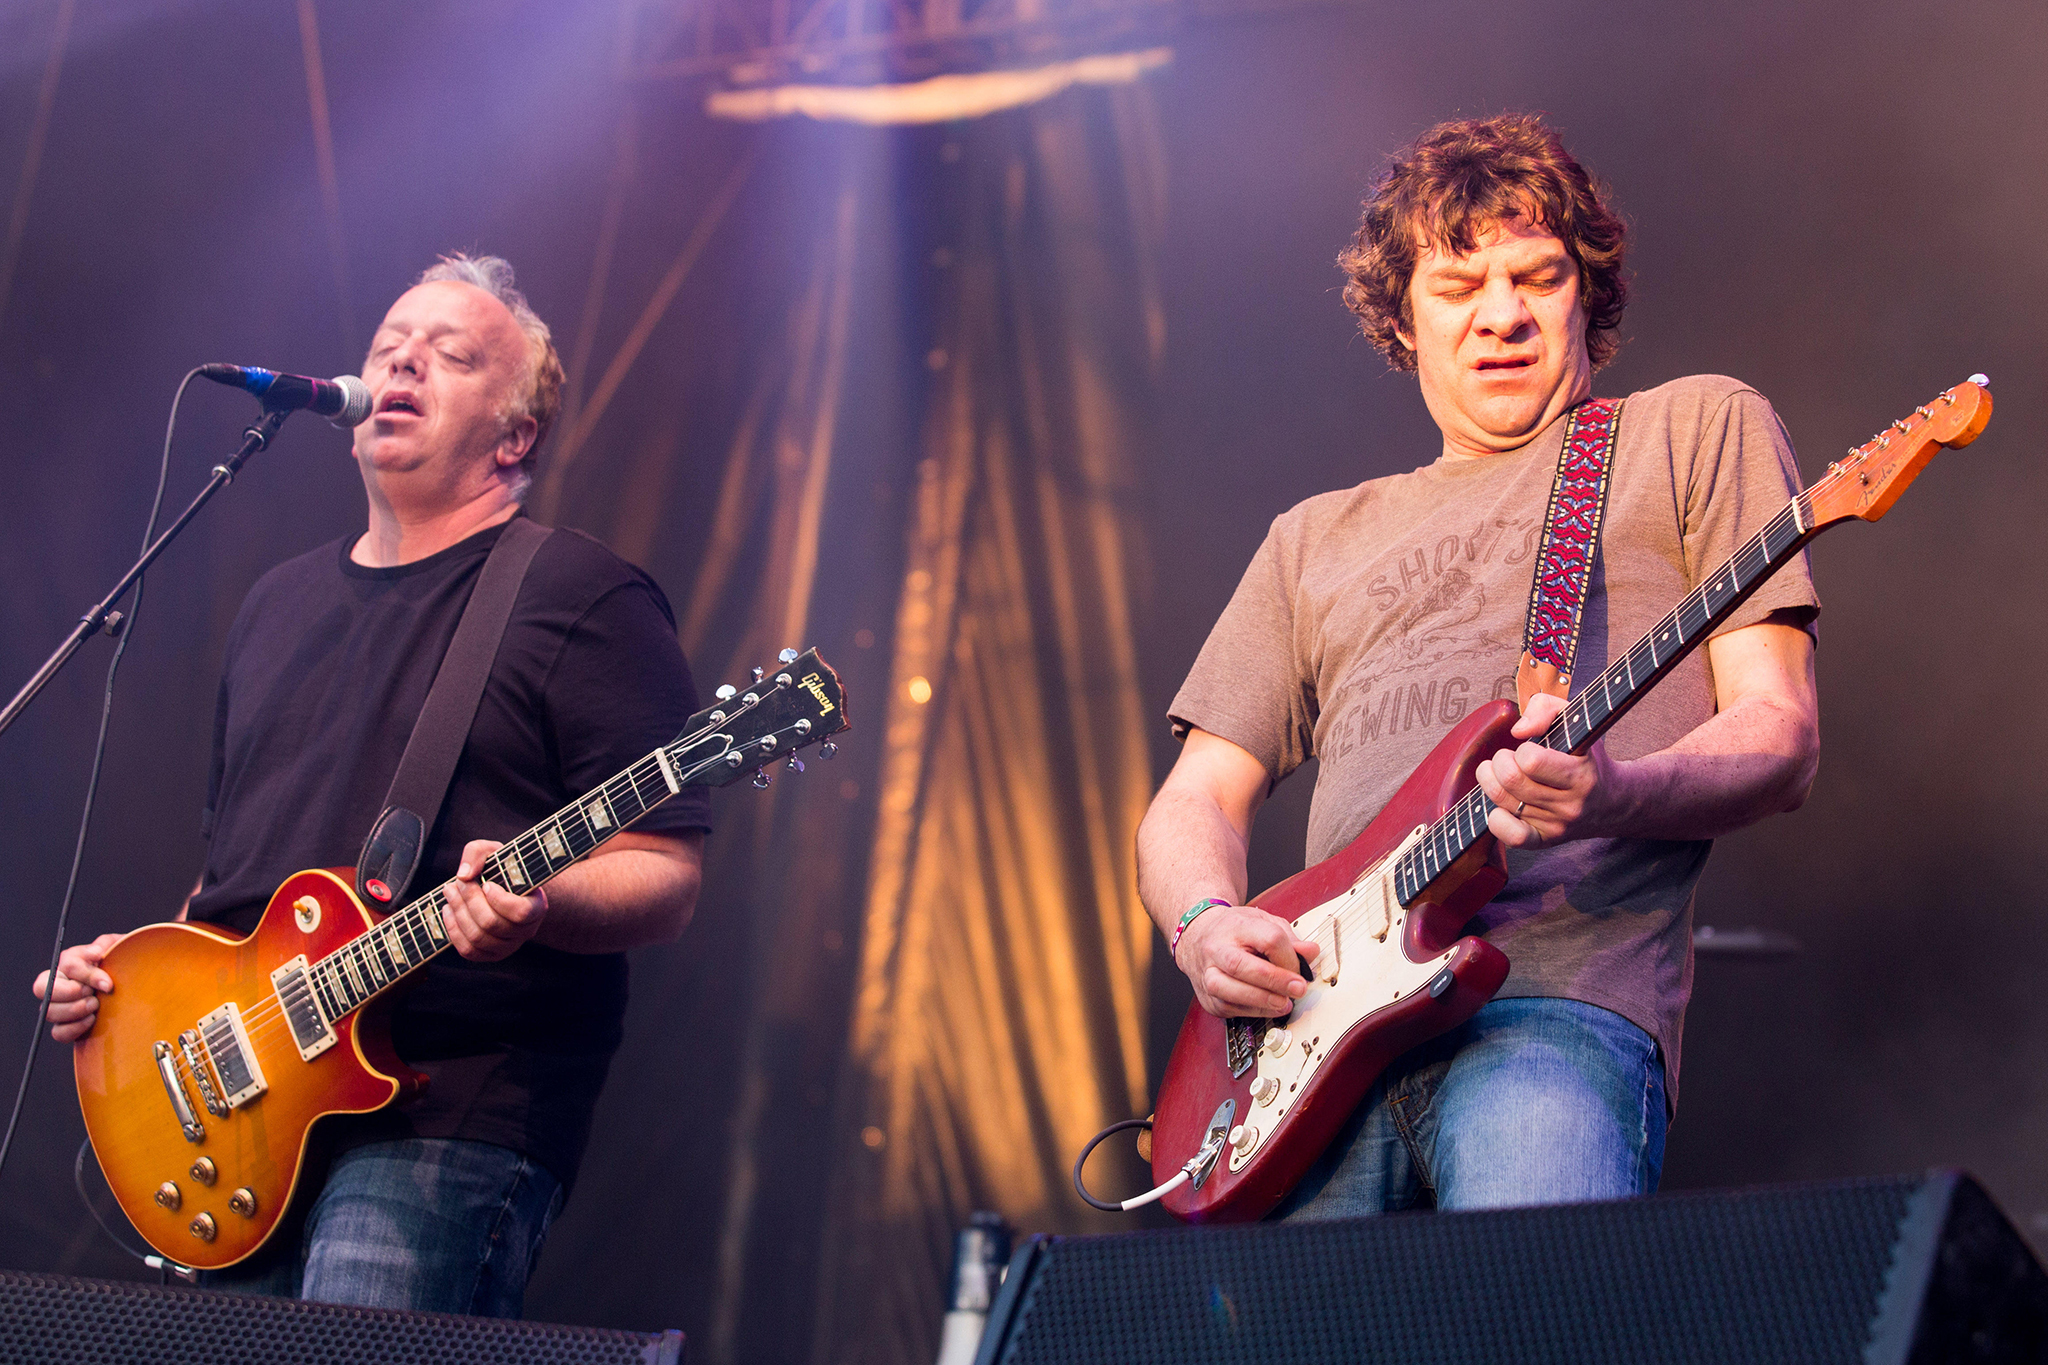 Eight things to know about the band Ween and their reunion tour